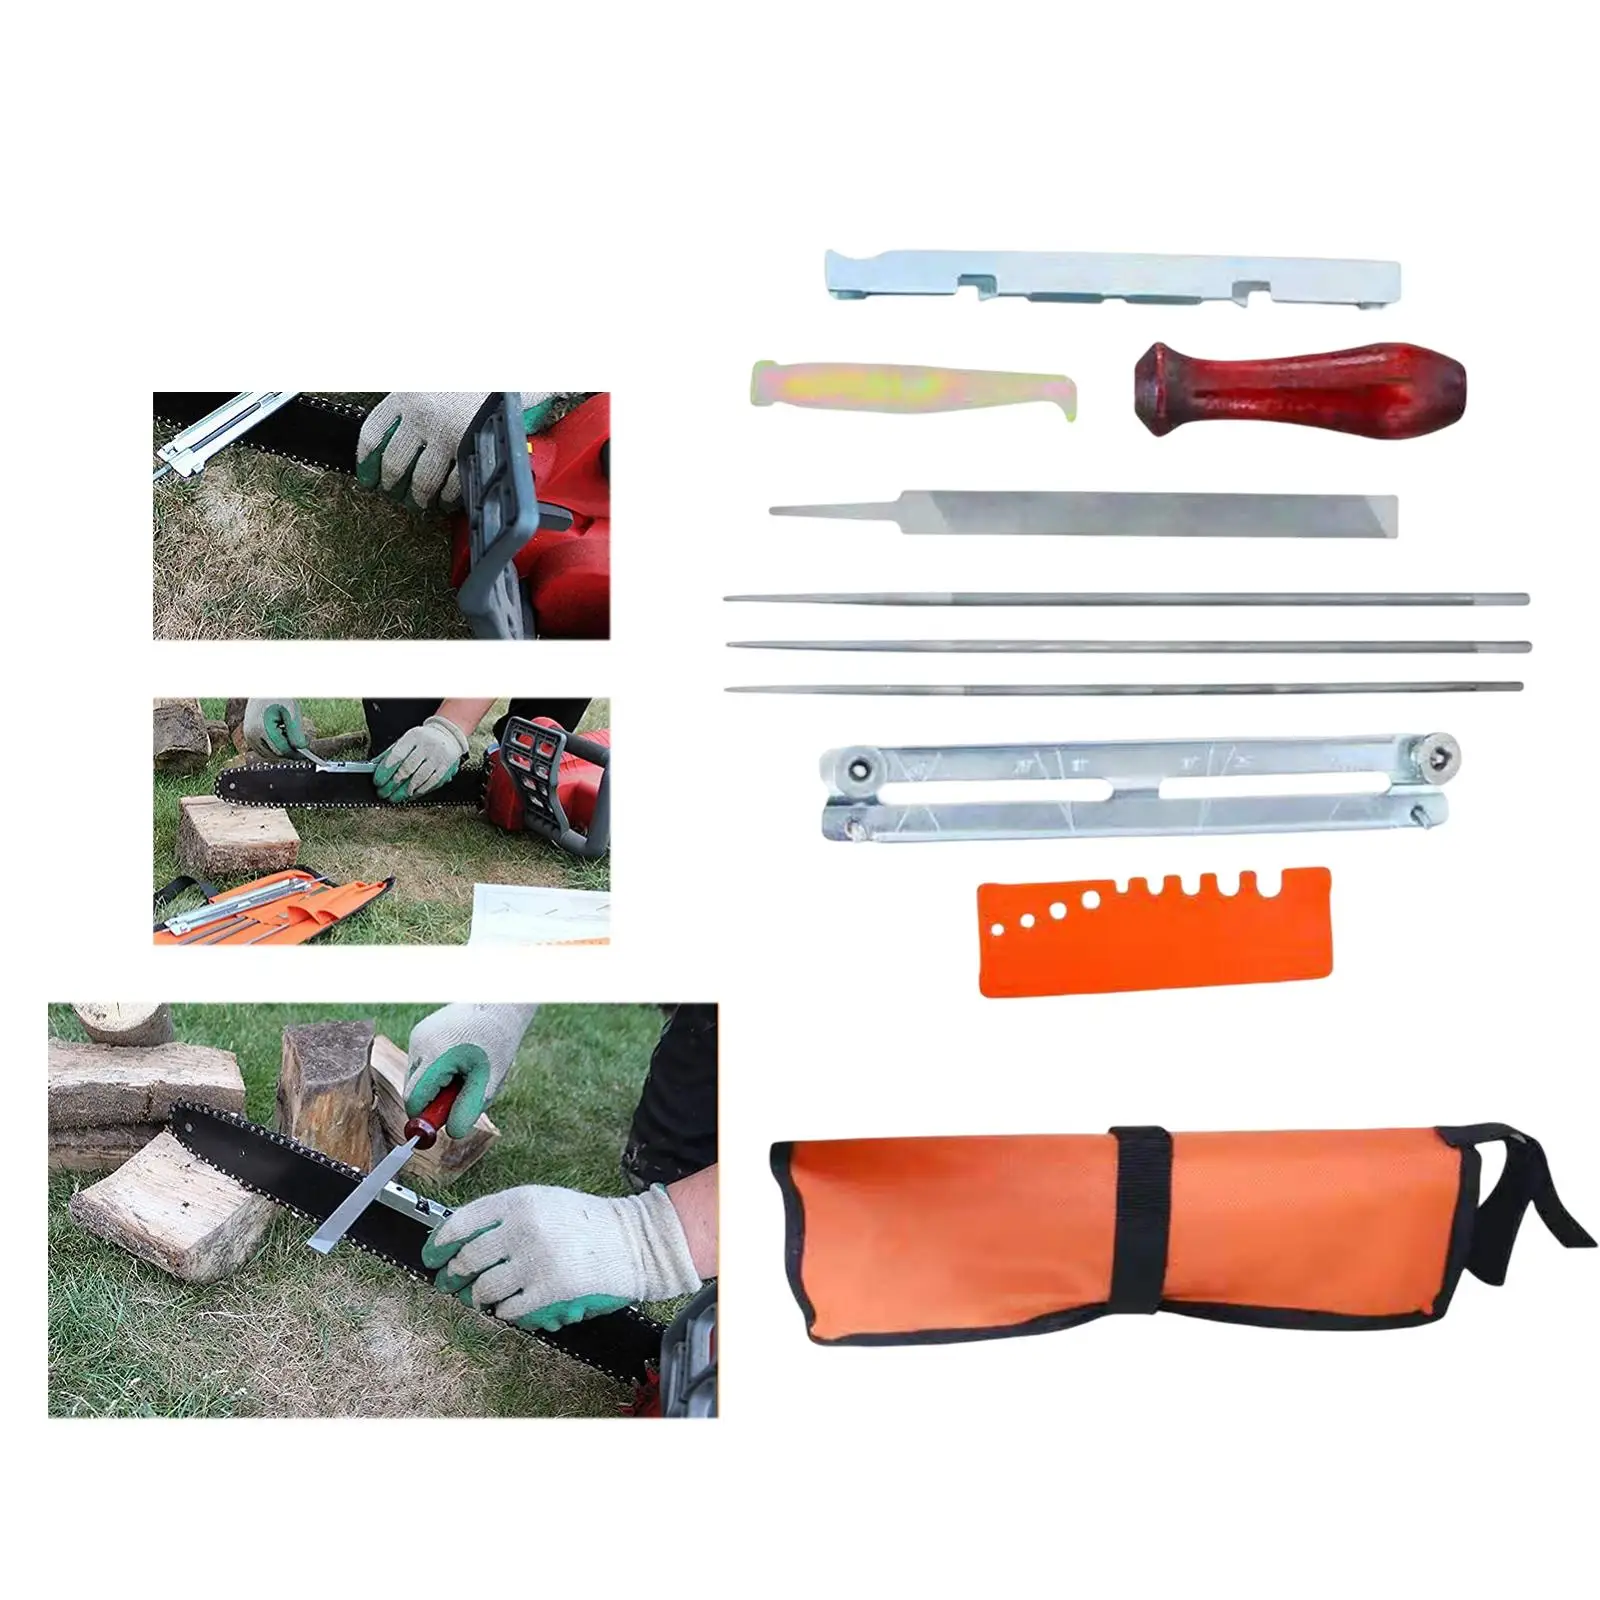 10Pcs Professional Chainsaw File Kit for Grinding and Filing Chainsaw Chain Depth Gauge with Tool Pouch Chainsaw Accessories